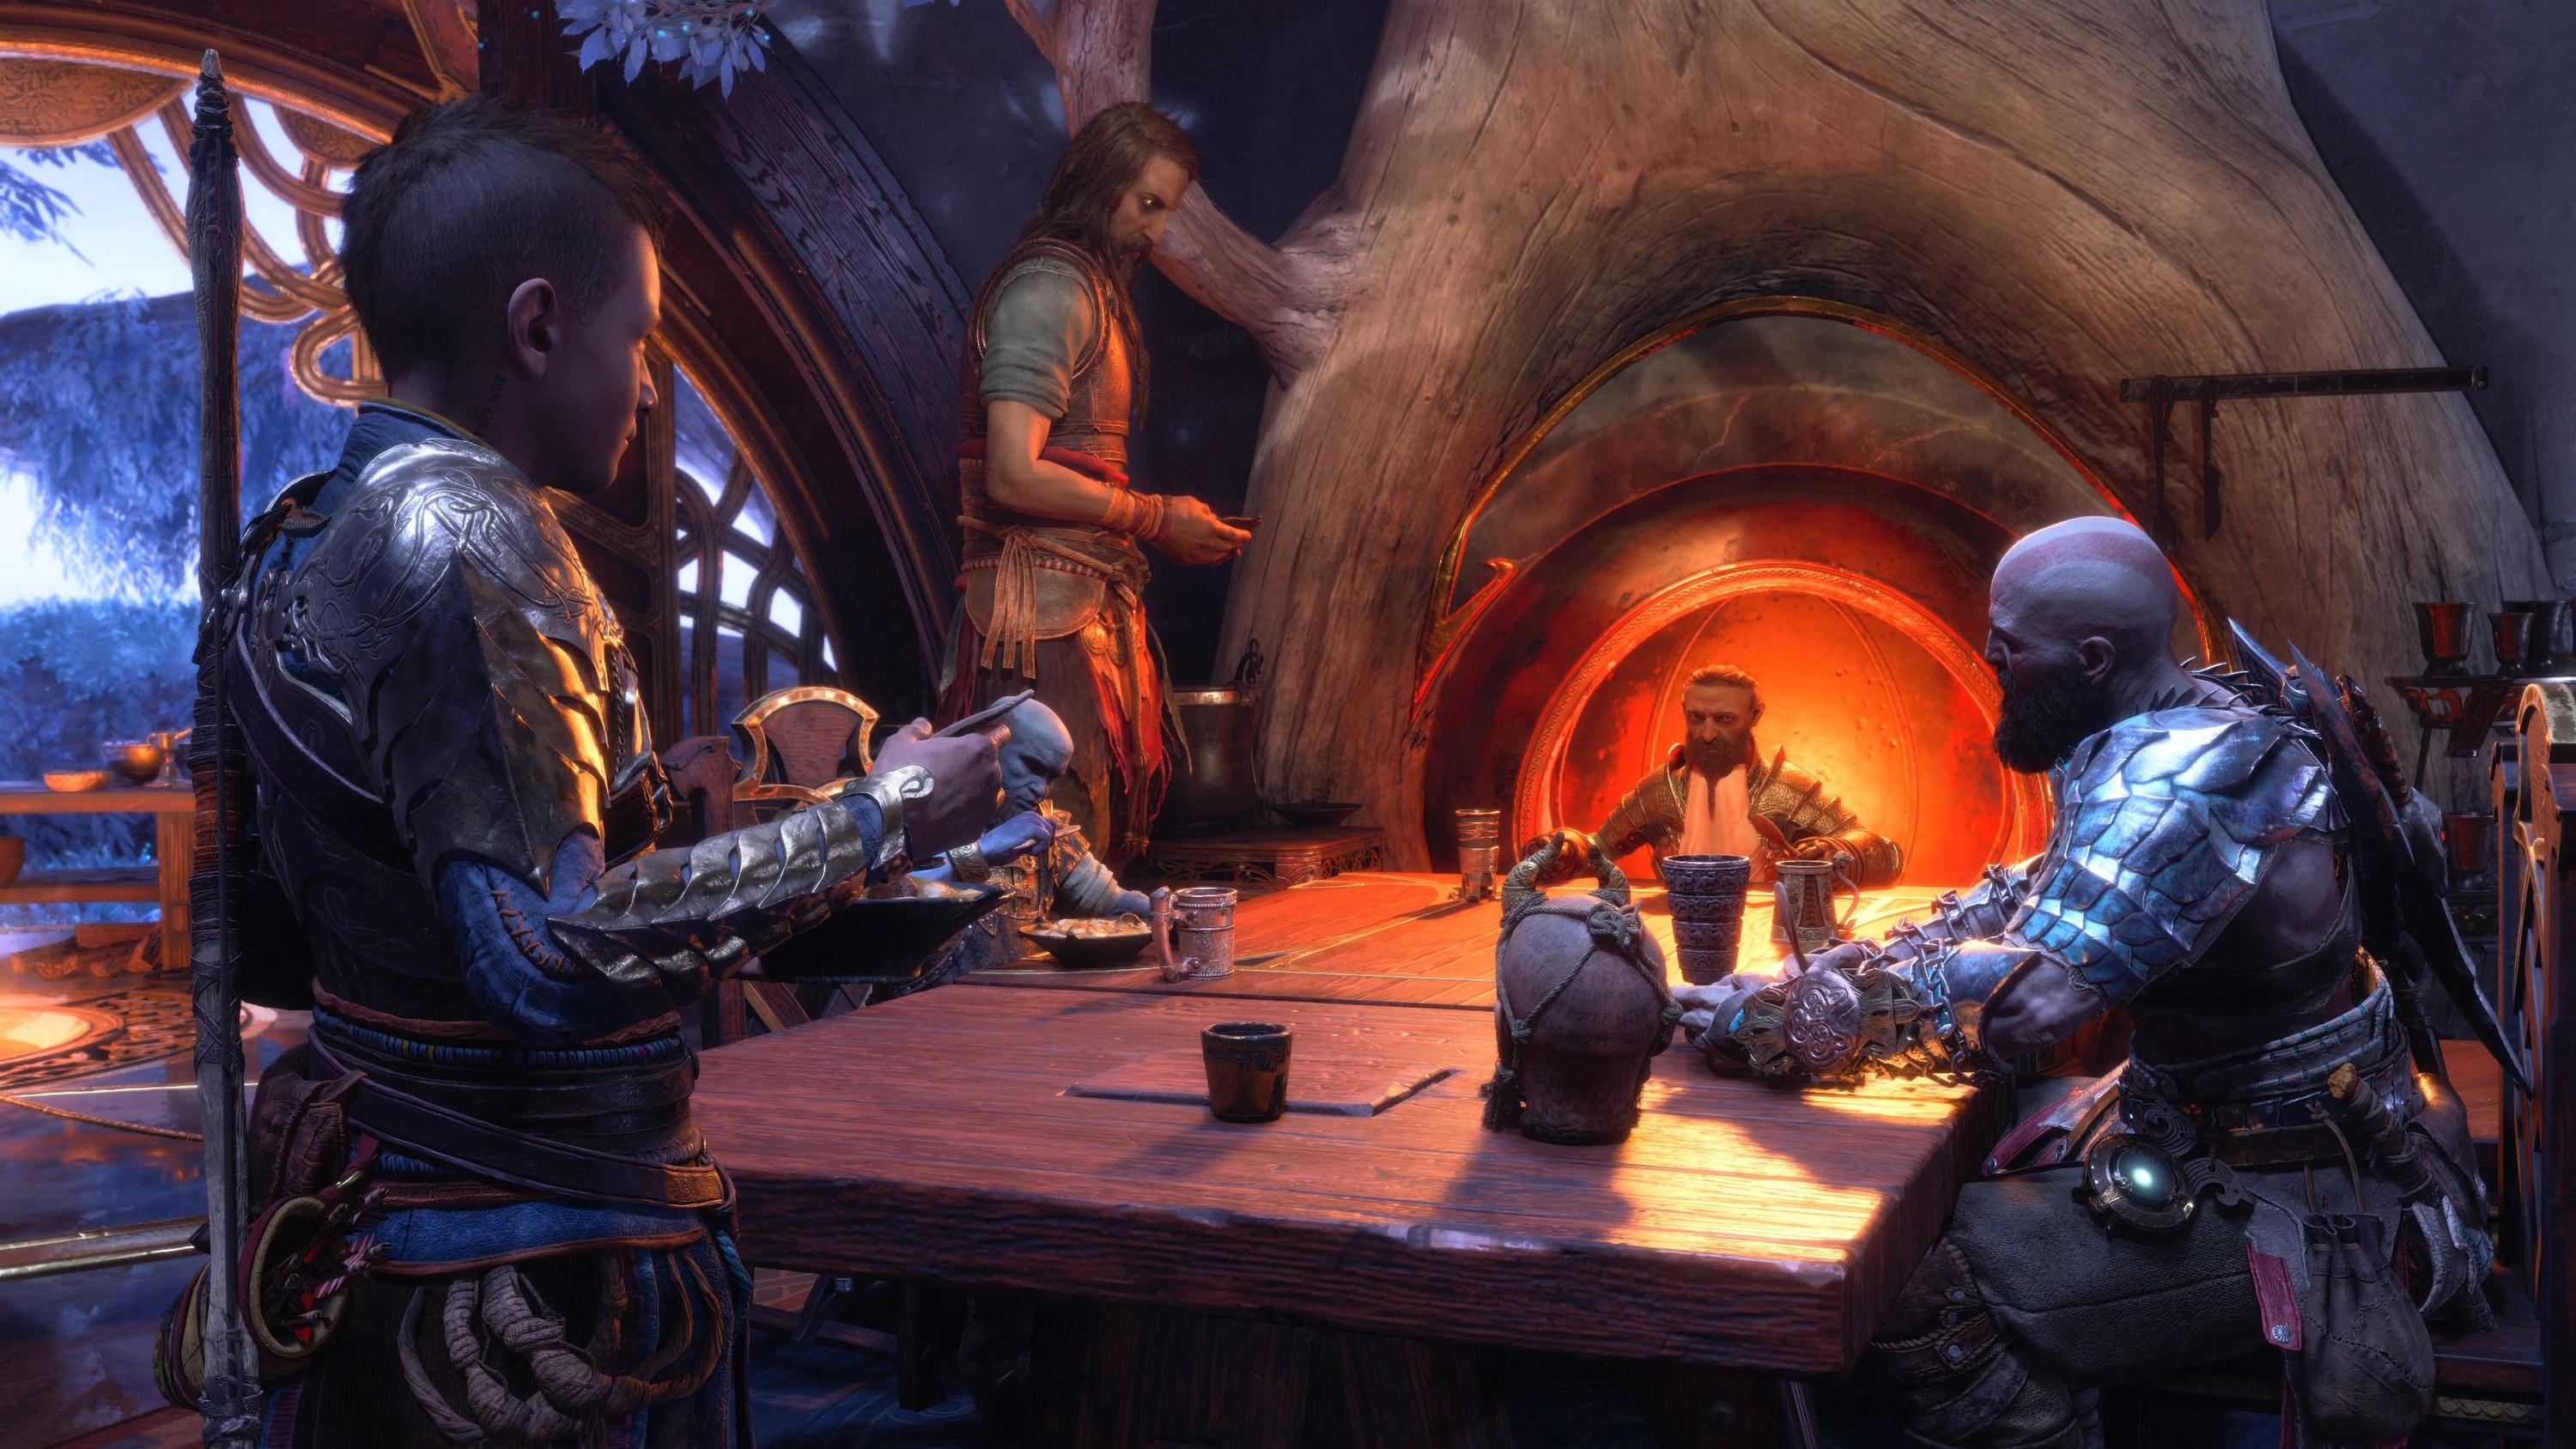 A boy in armor, a blue dwarf, a tall man, a tan dwarf, a bald man in leather armor, and a disembodied head gather for a meal at a table in front of a fireplace